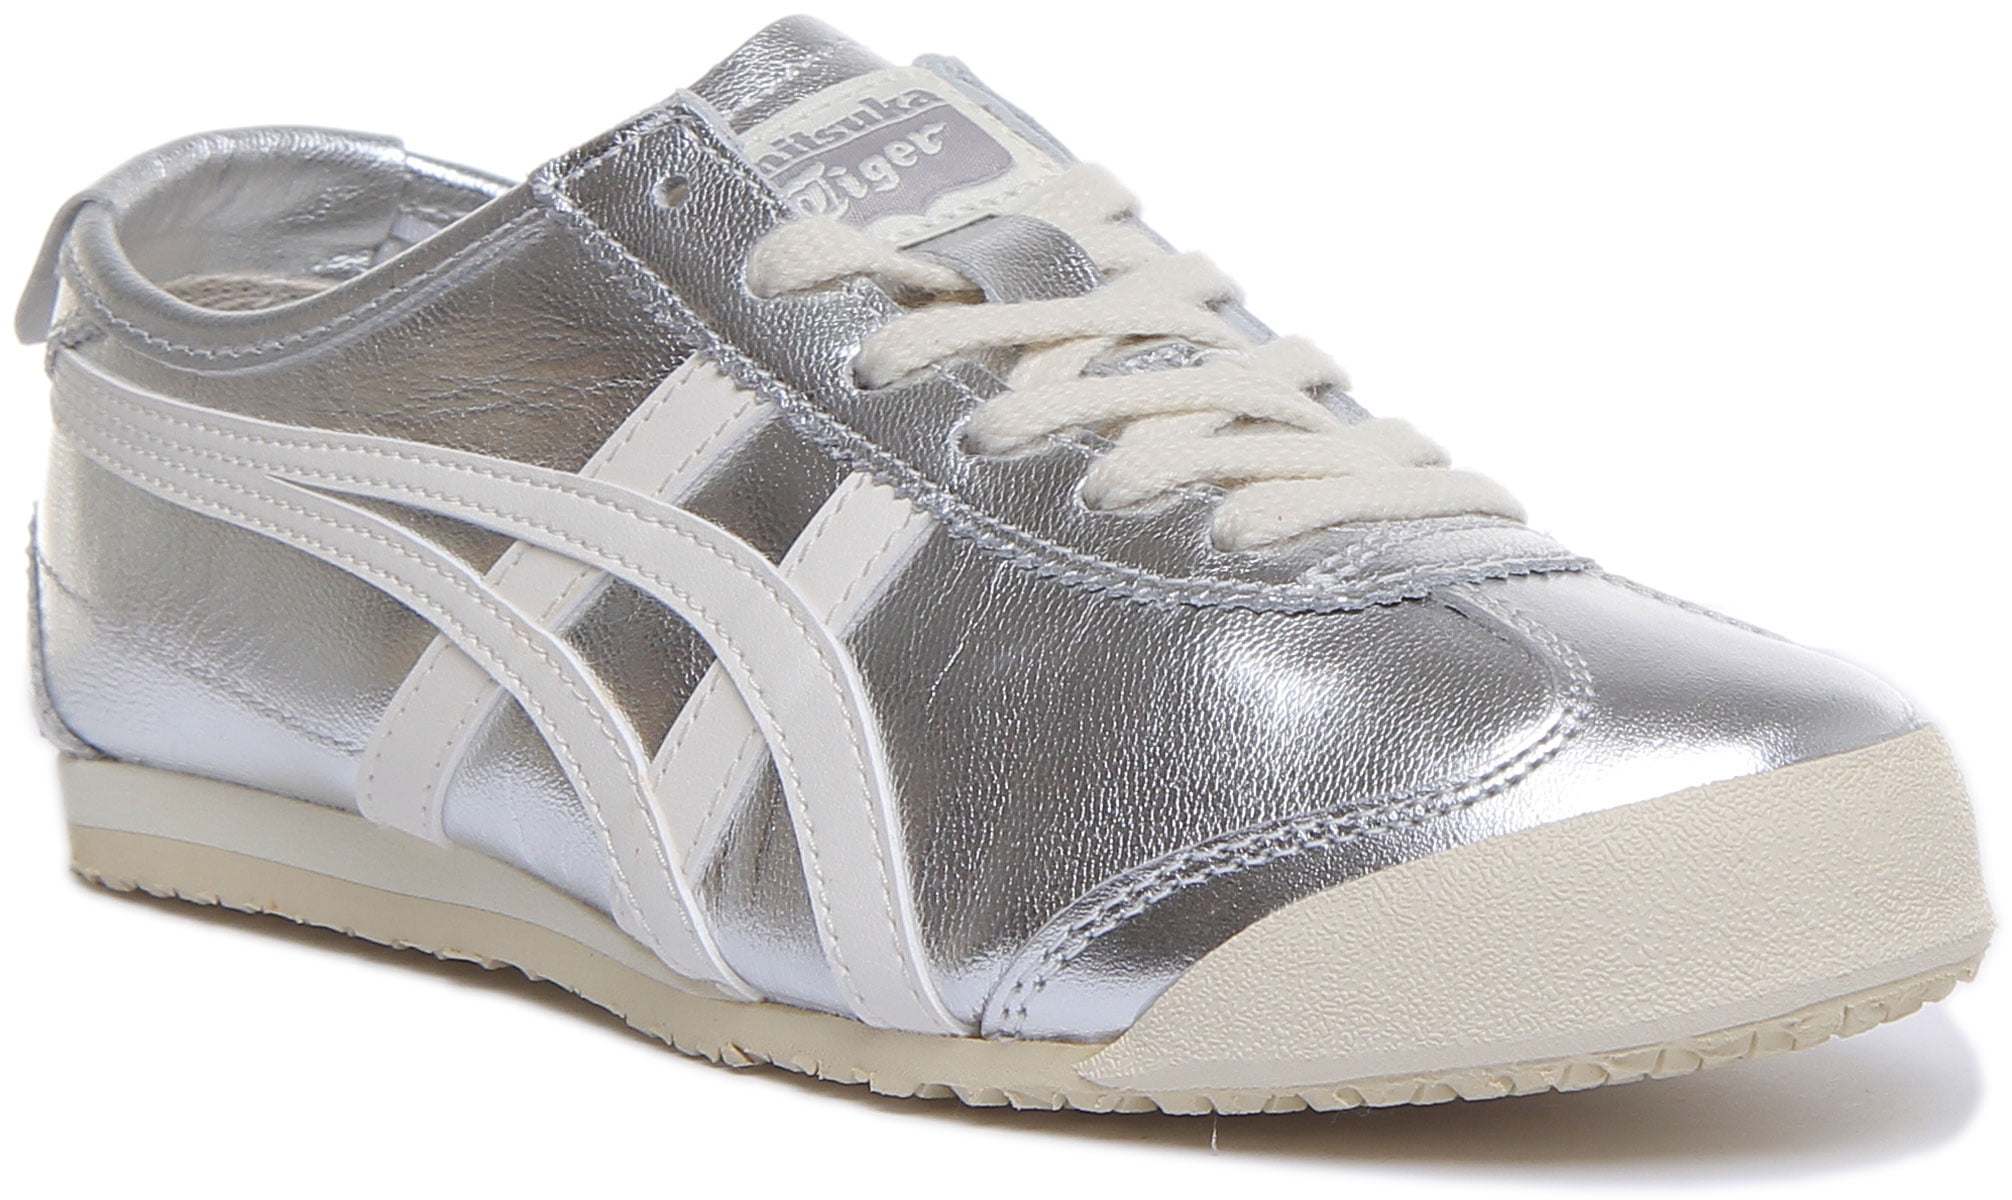 Onitsuka Tiger Mexico 66 Unisex Lace Up Metallic Shiny Leather Trainers ...